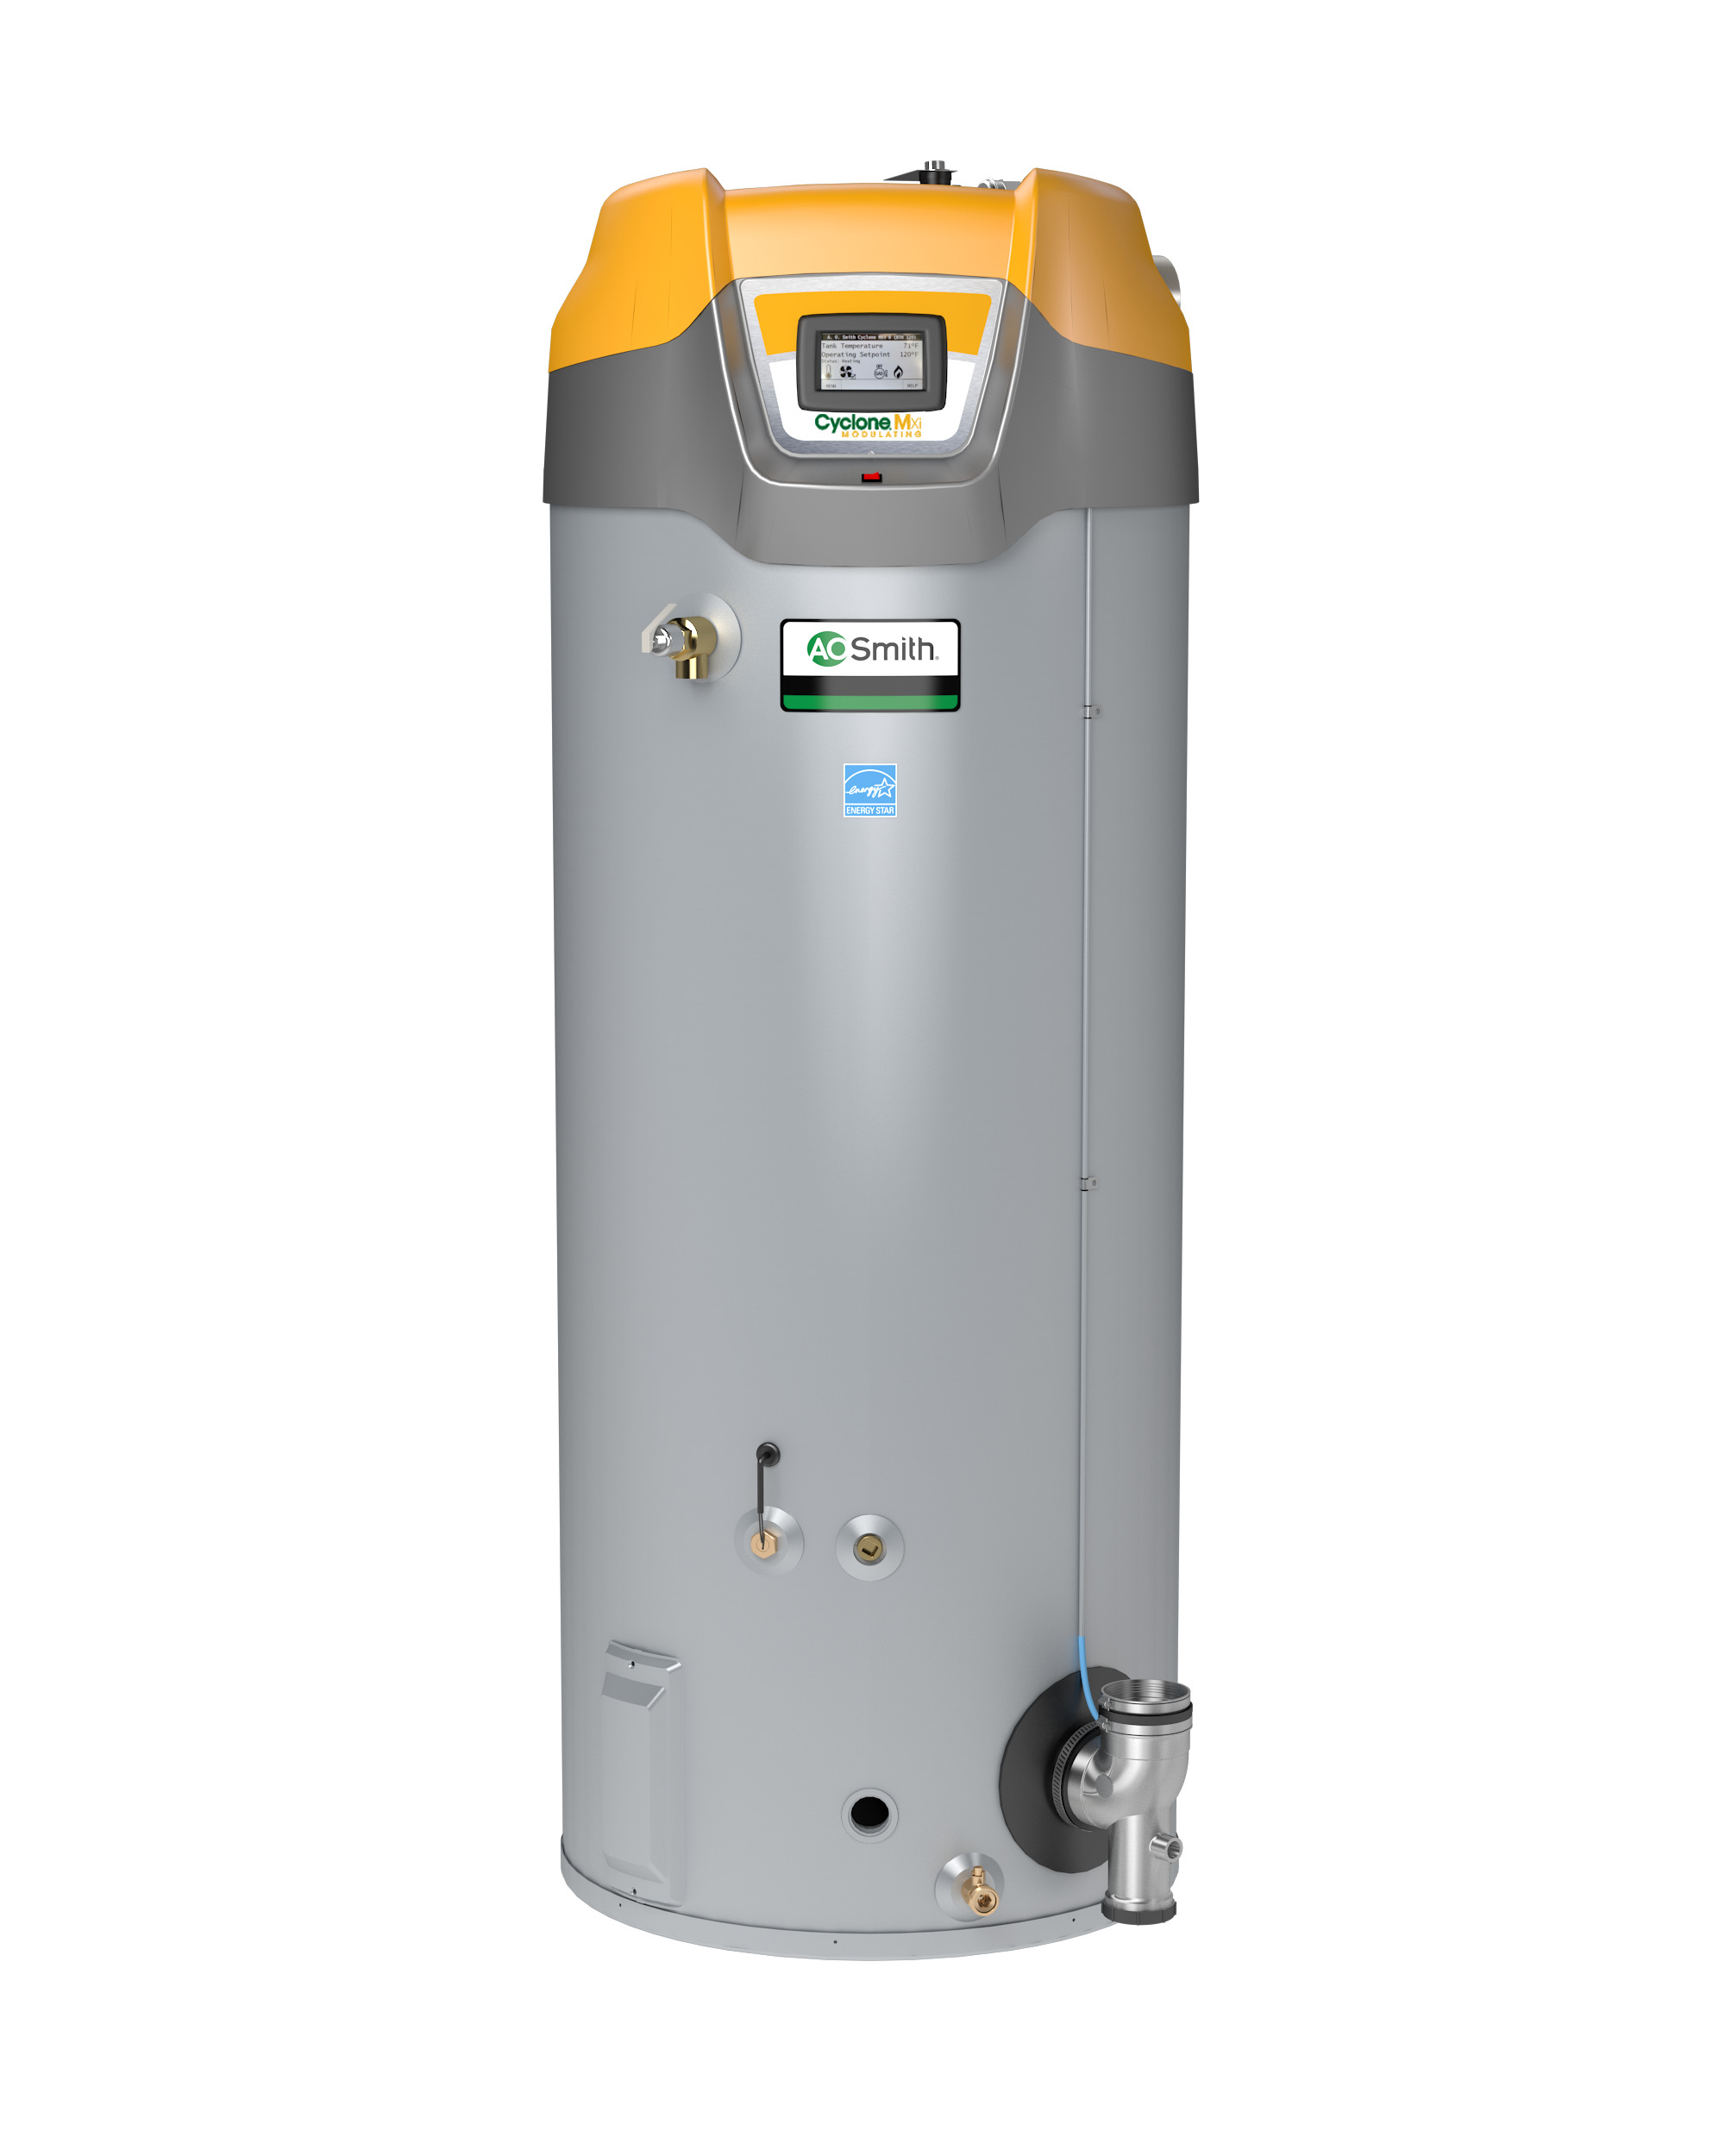 AO Smith BTH-120: 60 GALLON, 120,000 BTU, Cyclone Mxi, Commercial gas water heater, 3inch Vent, Up To 95% Thermal Efficiency, Natural Gas